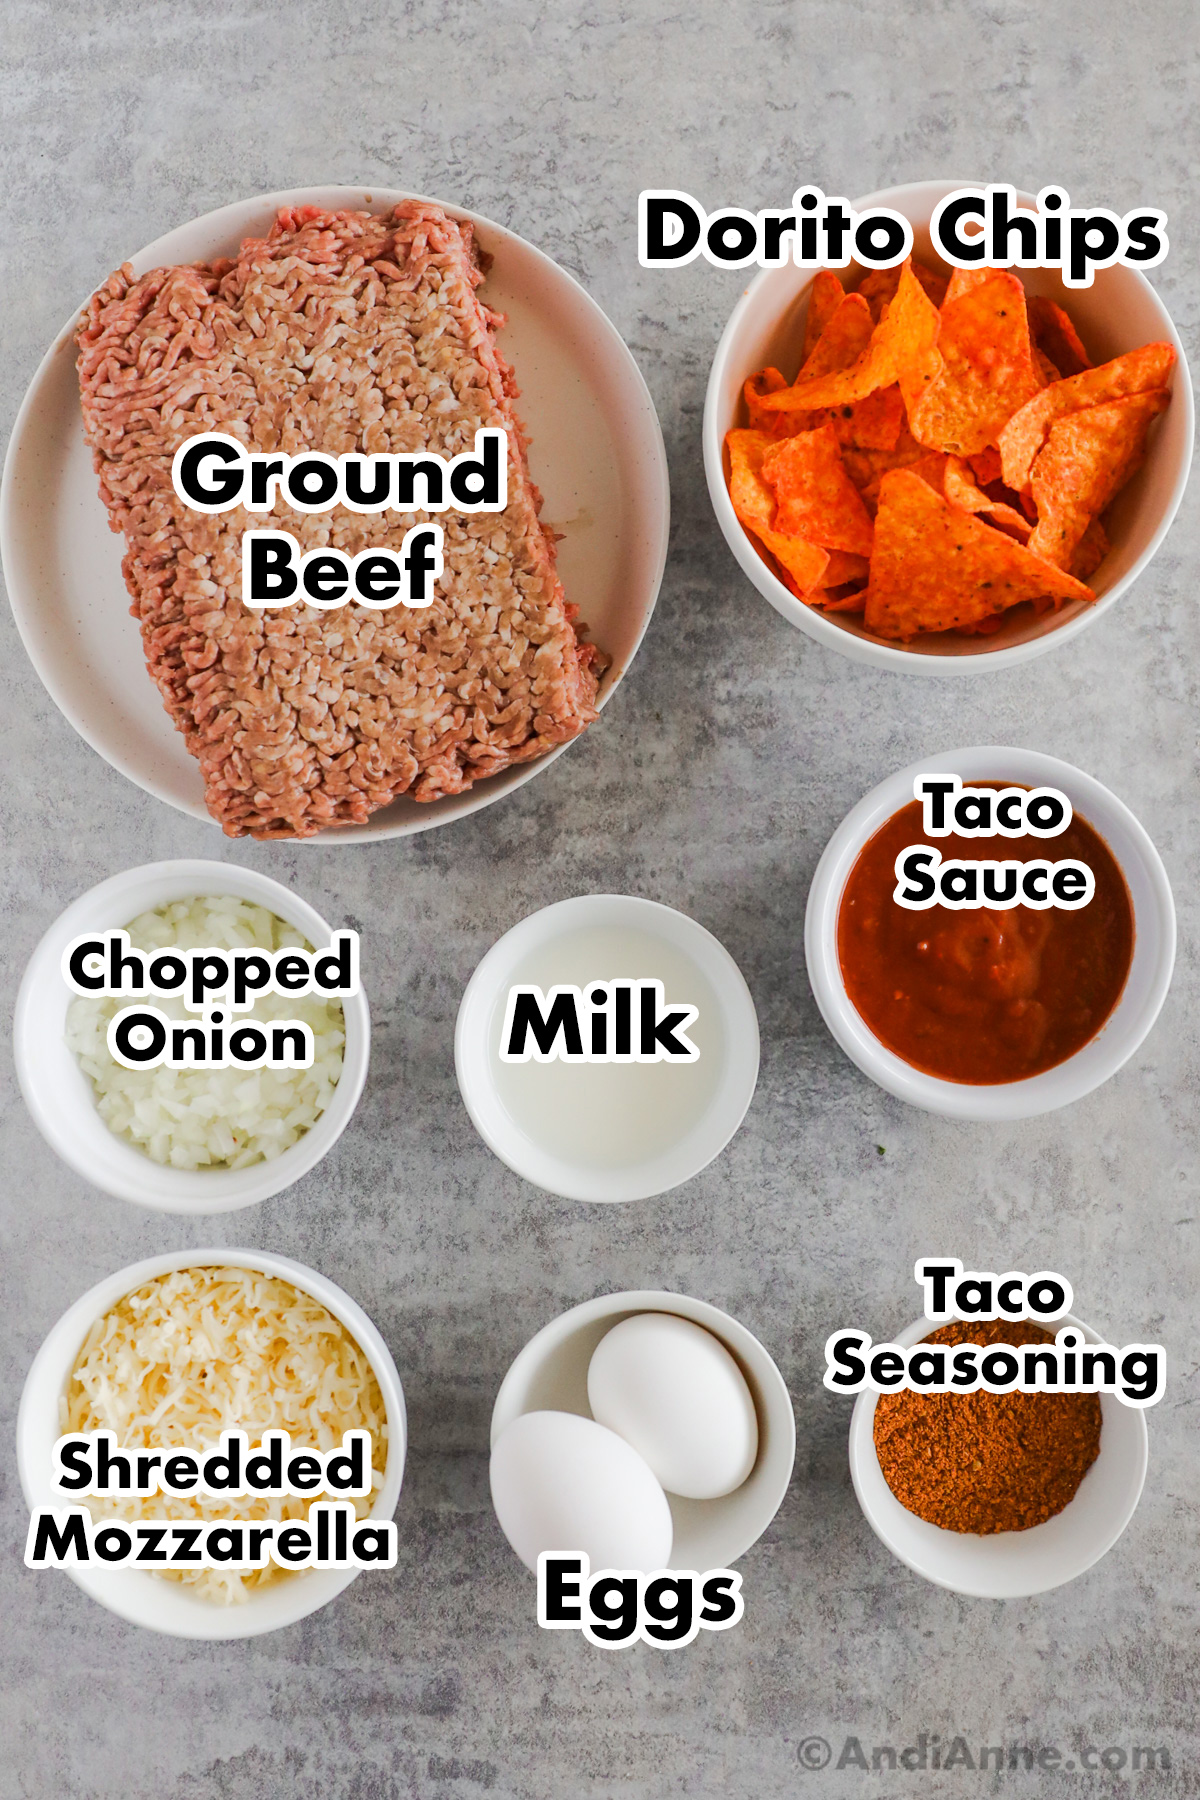 Recipe ingredients on the counter including raw lean ground beef, bowl of Dorito chips, bowls of chopped onion, milk, taco sauce, shredded mozzarella, eggs and taco seasoning.